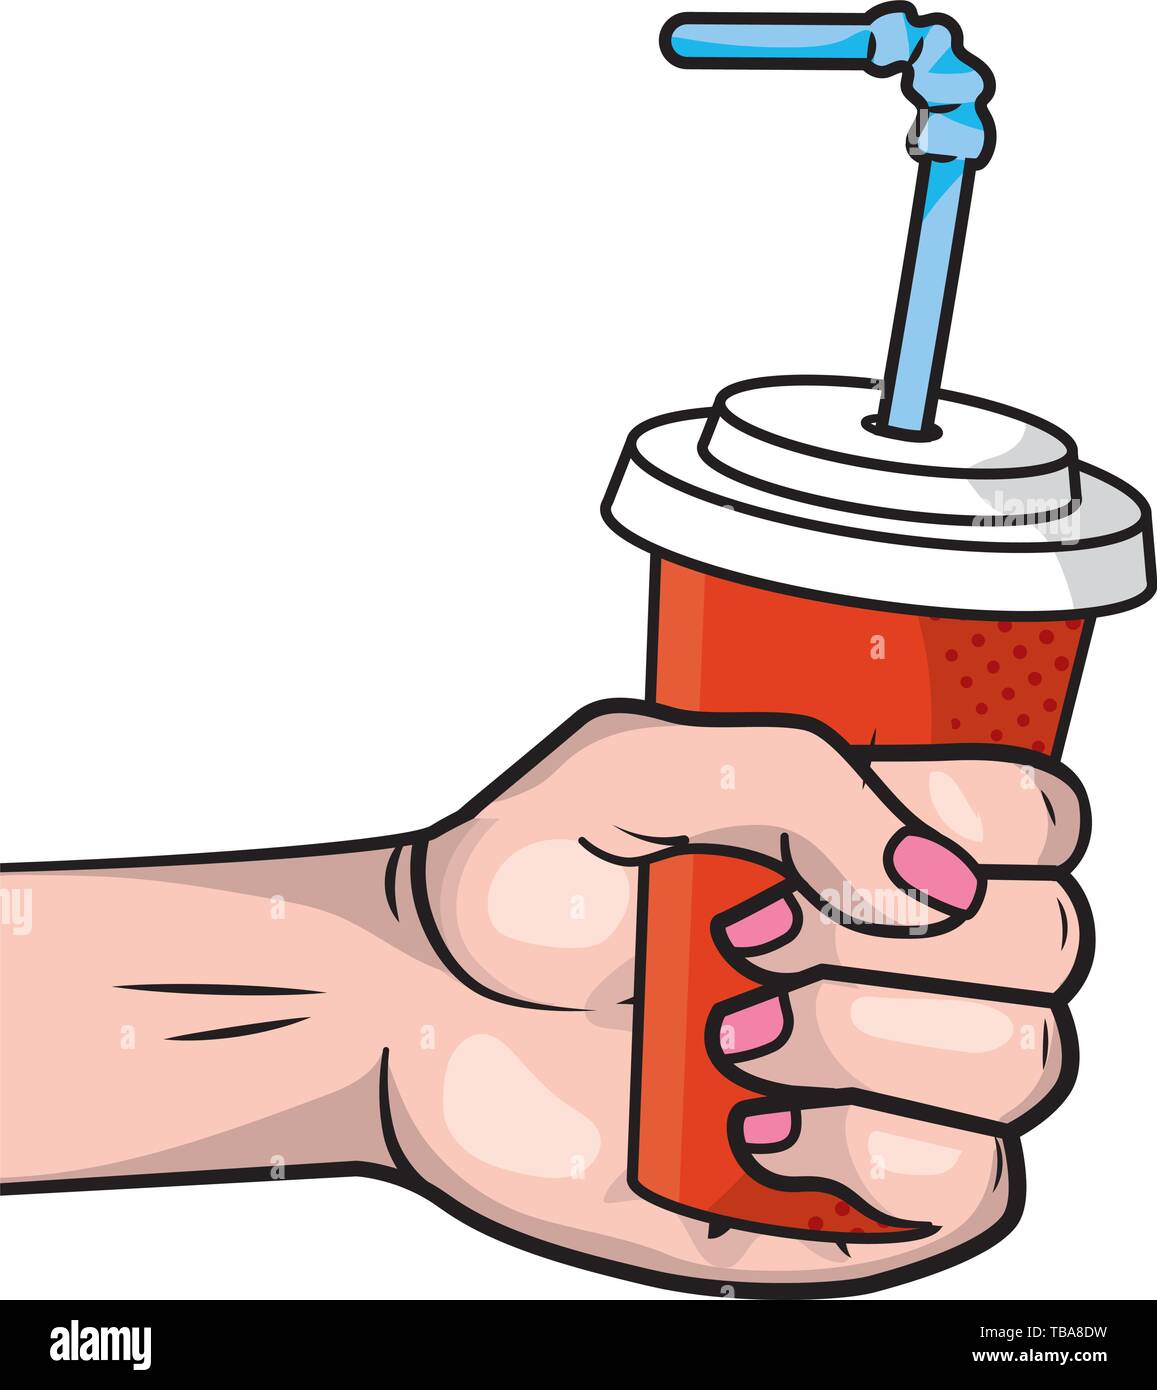 https://c8.alamy.com/comp/TBA8DW/hand-holding-soda-paper-cup-with-straw-vector-illustration-graphic-design-TBA8DW.jpg